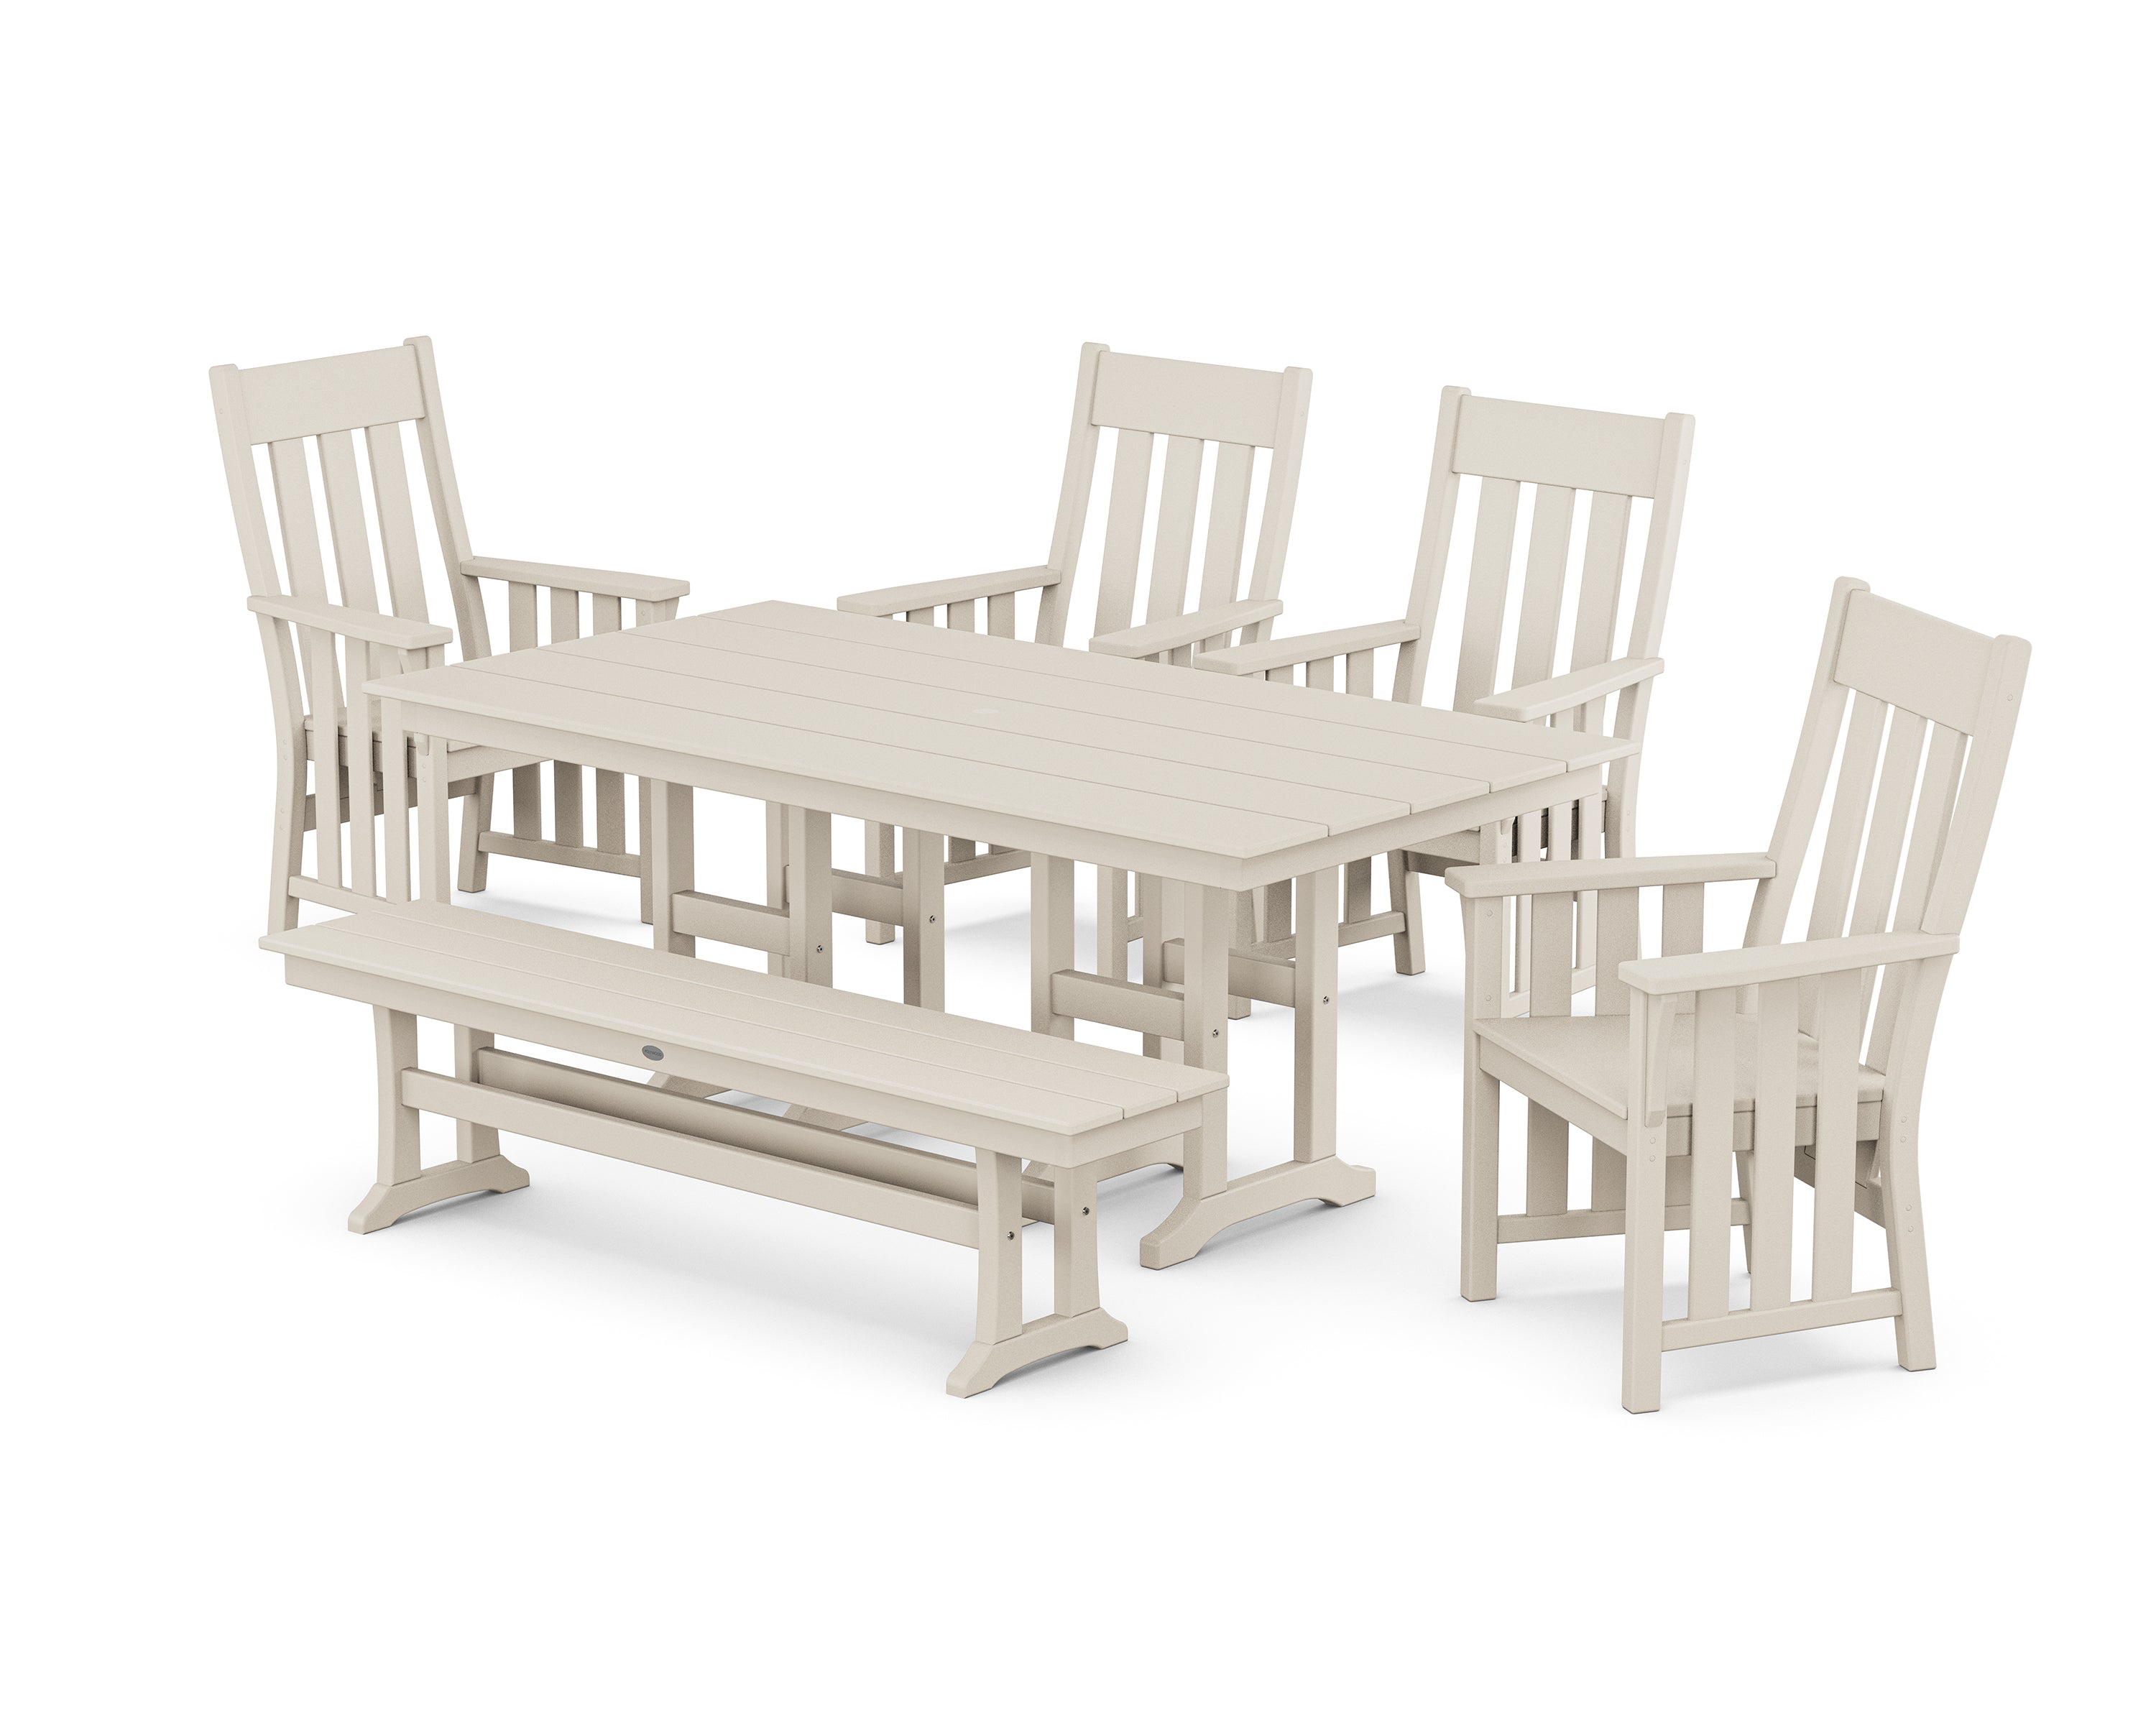 Martha Stewart by POLYWOOD® Acadia 6-Piece Farmhouse Dining Set with Bench in Sand